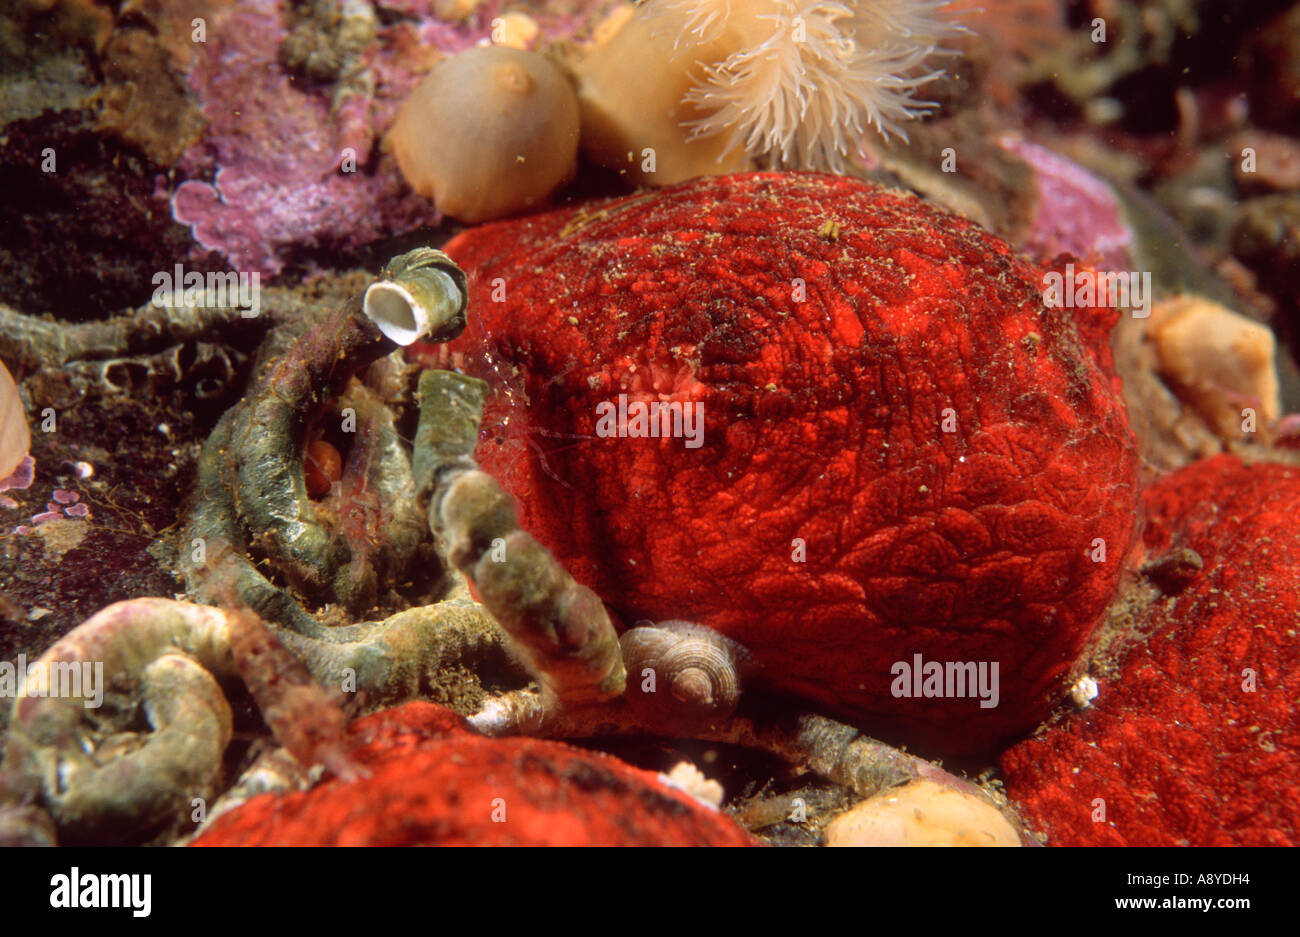 Marine invertebrates: red sea cucumber holothurian Psolus fabricii and calcareous tubes of sepulidae polychaete worms. N Pacific Stock Photo